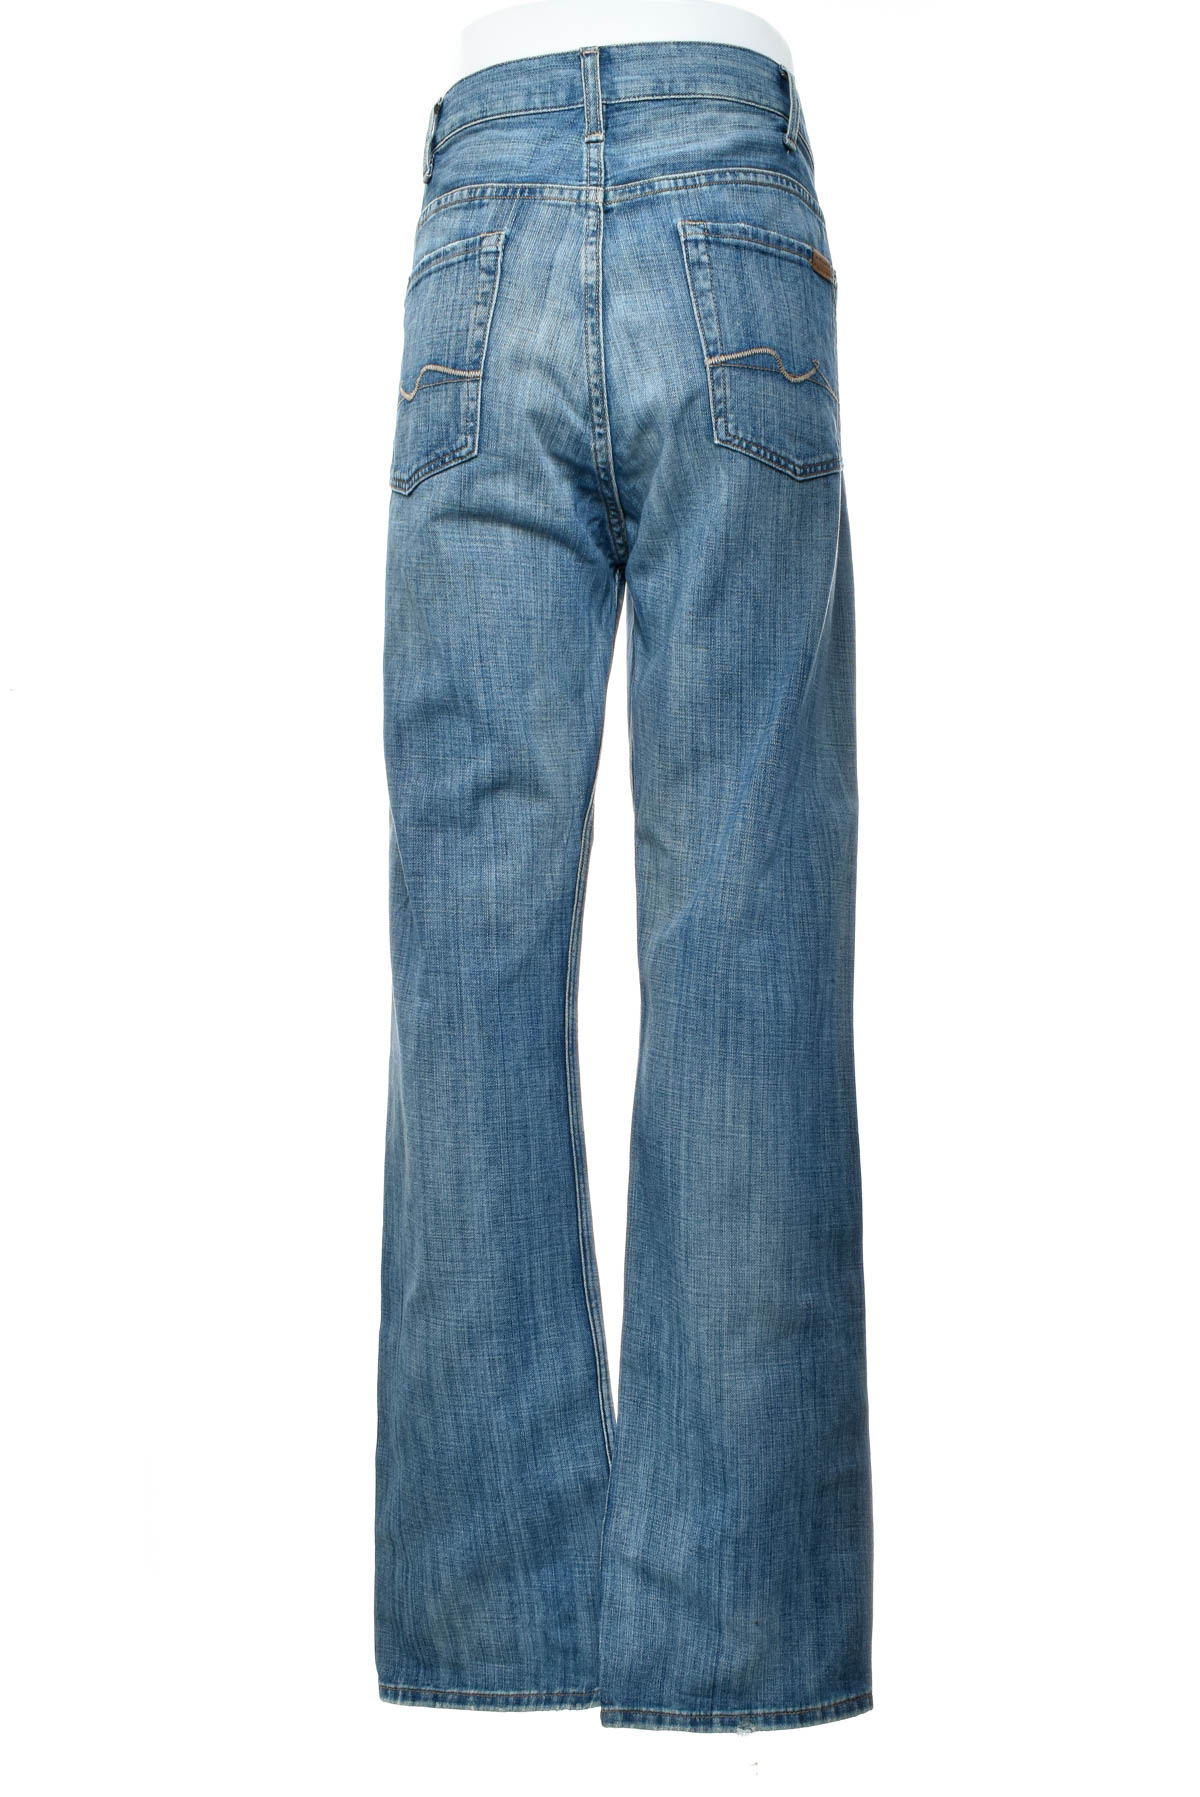 Men's jeans - 7 For All Mankind - 1